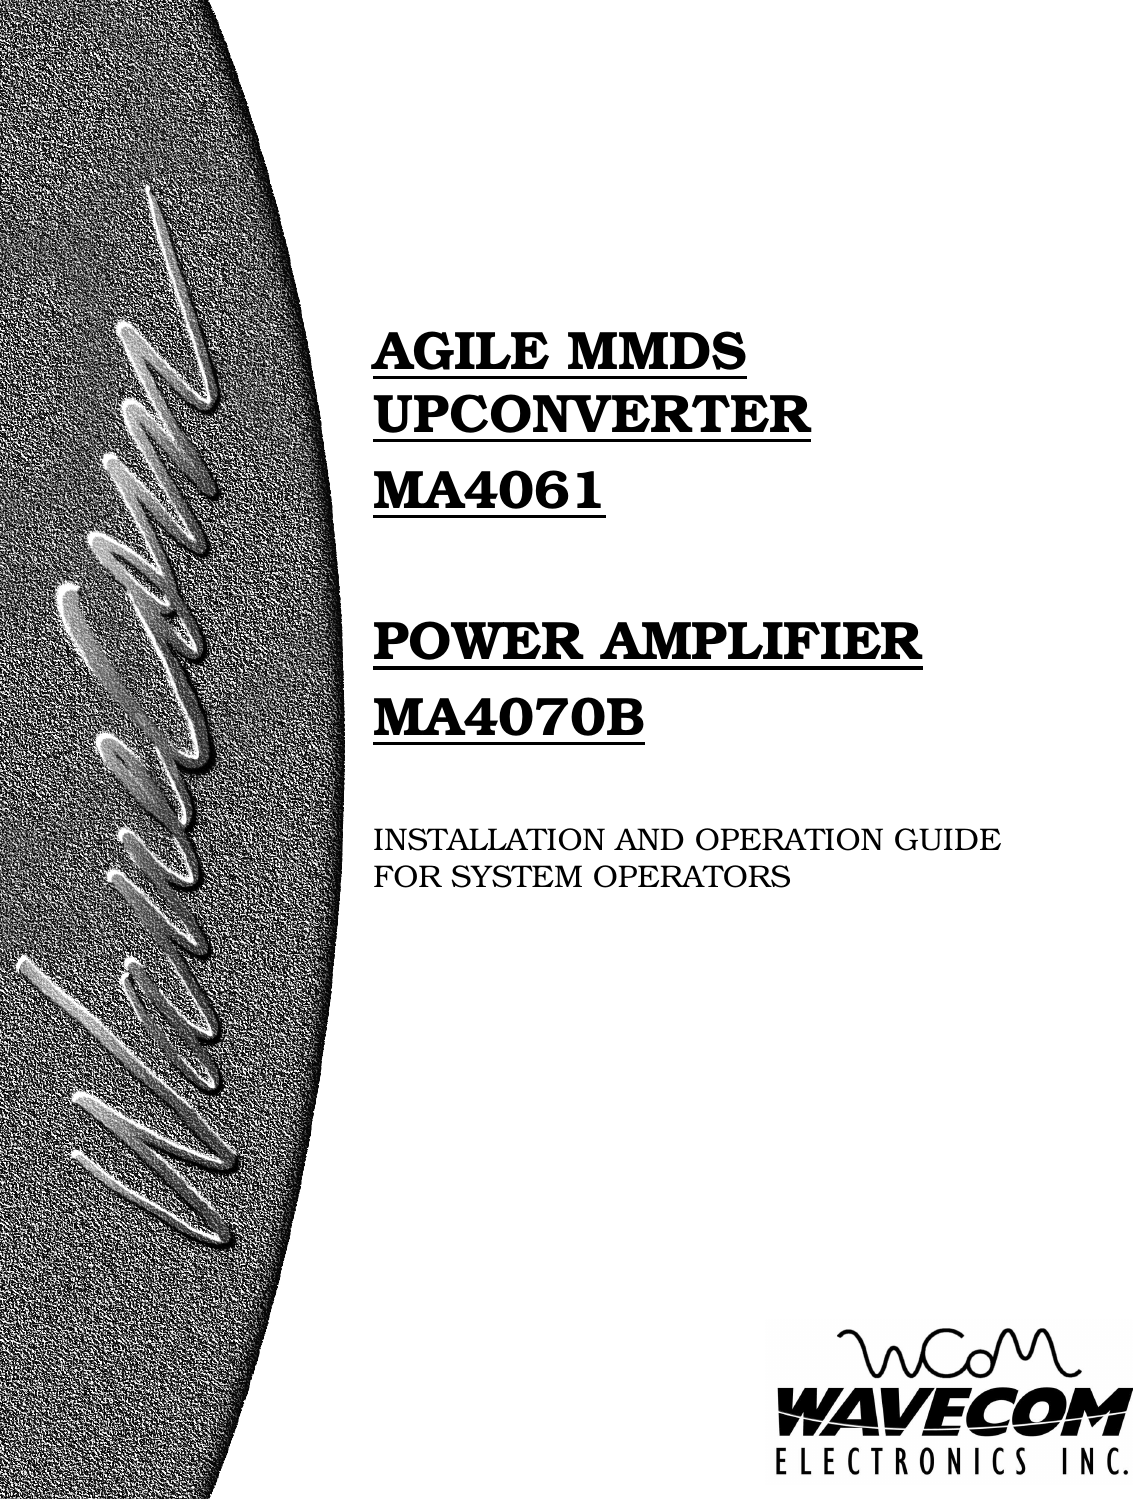   AGILE MMDS UPCONVERTER MA4061  POWER AMPLIFIER MA4070B   INSTALLATION AND OPERATION GUIDE FOR SYSTEM OPERATORS 